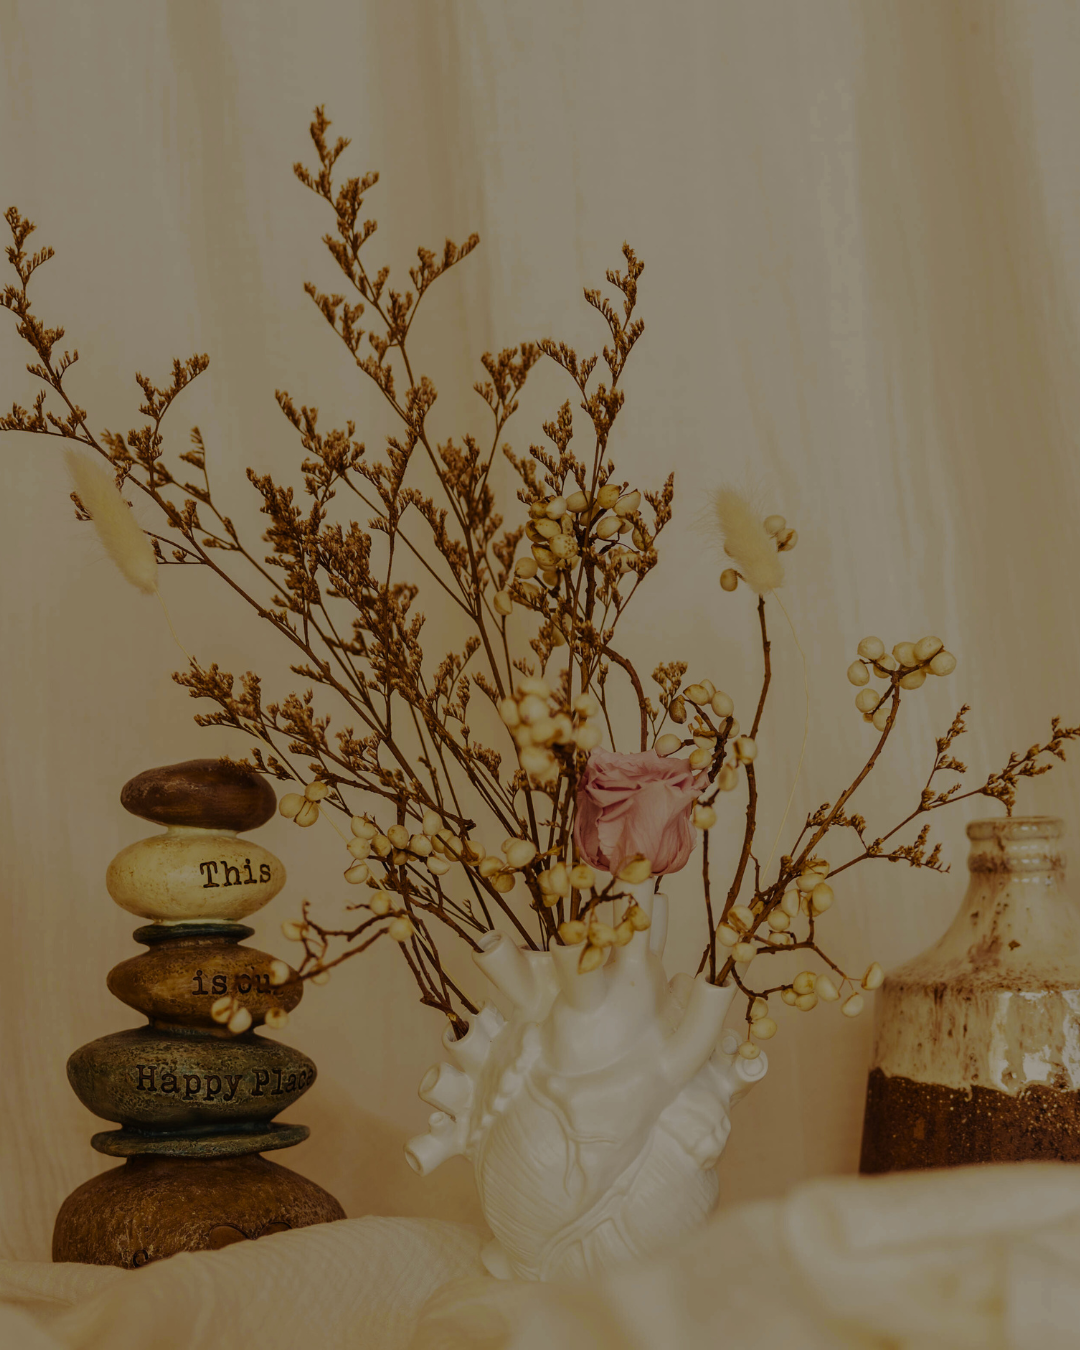 a dried flowers including dried cotton branch, and pink dried rose in white heart shaped vase with stacking rocks and a clay vase in the back